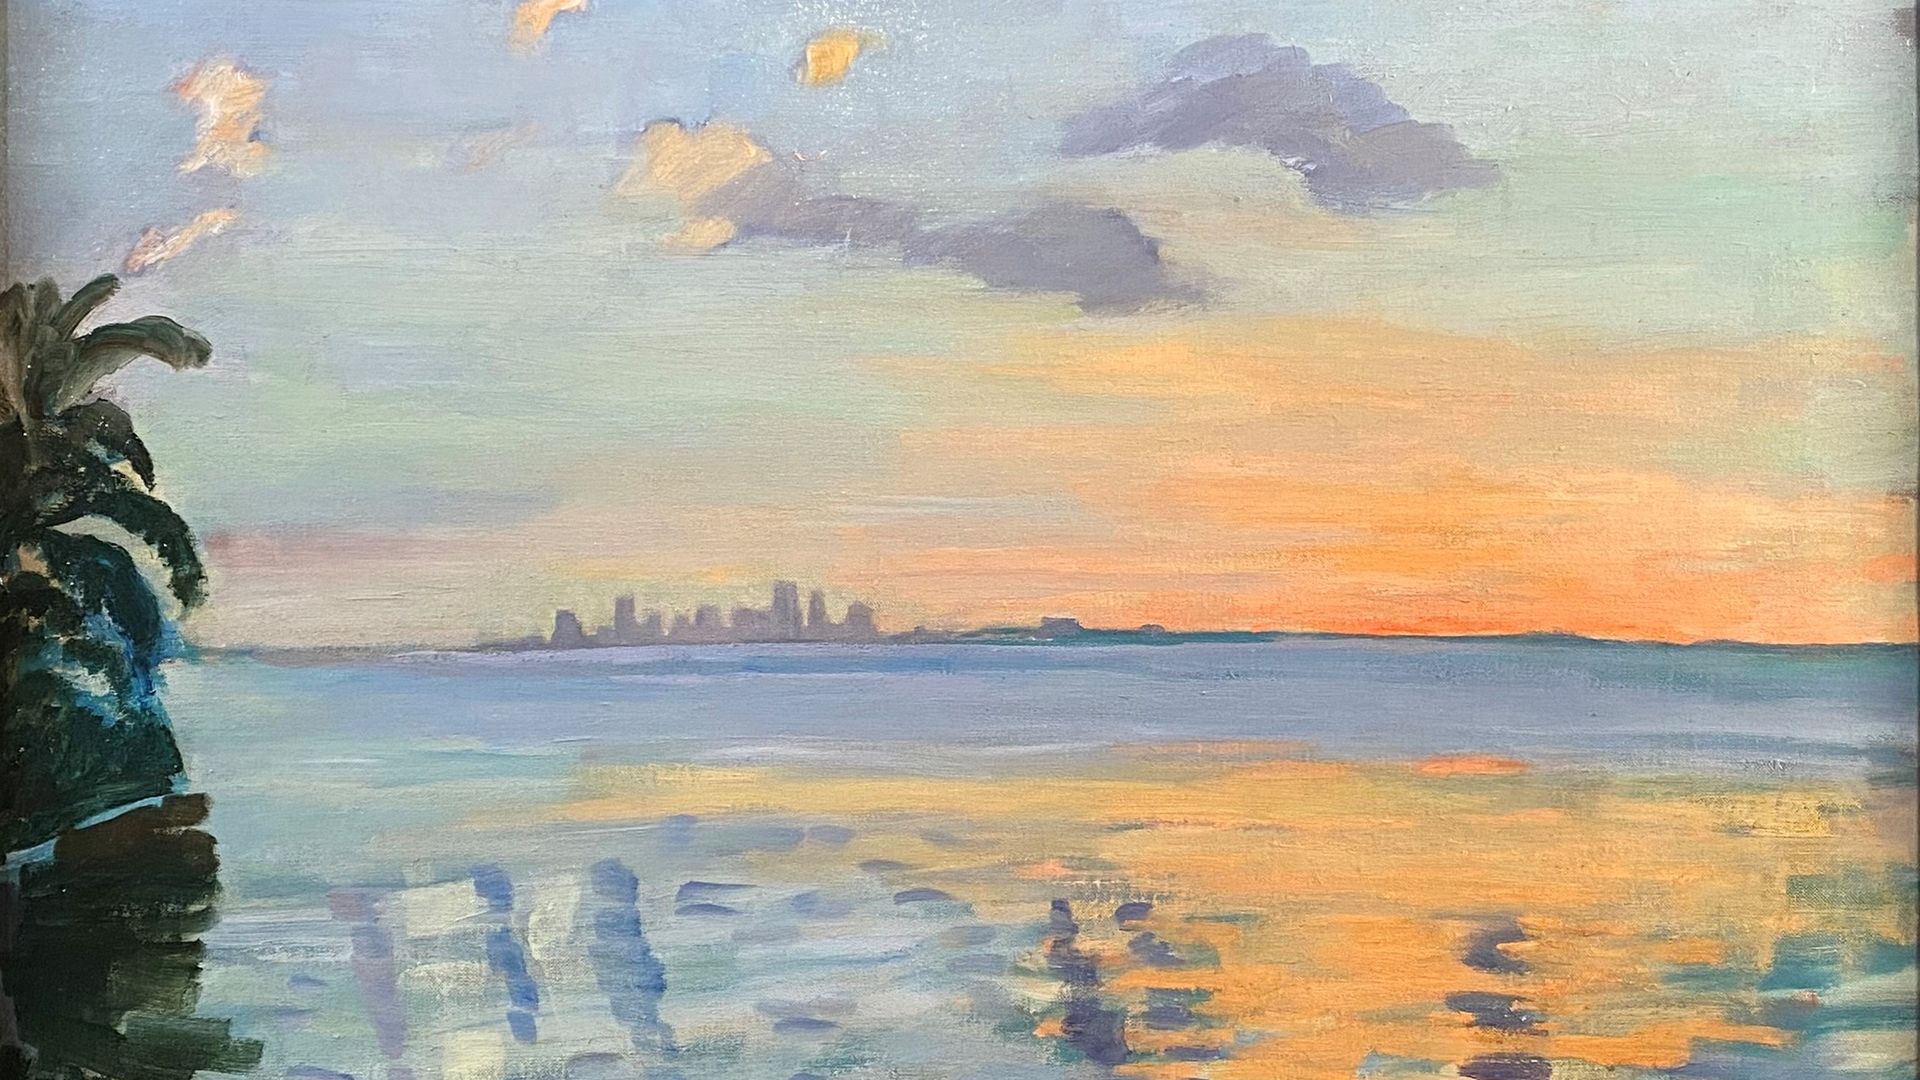 A painting of Biscayne bay in Miami and a city in the distance 